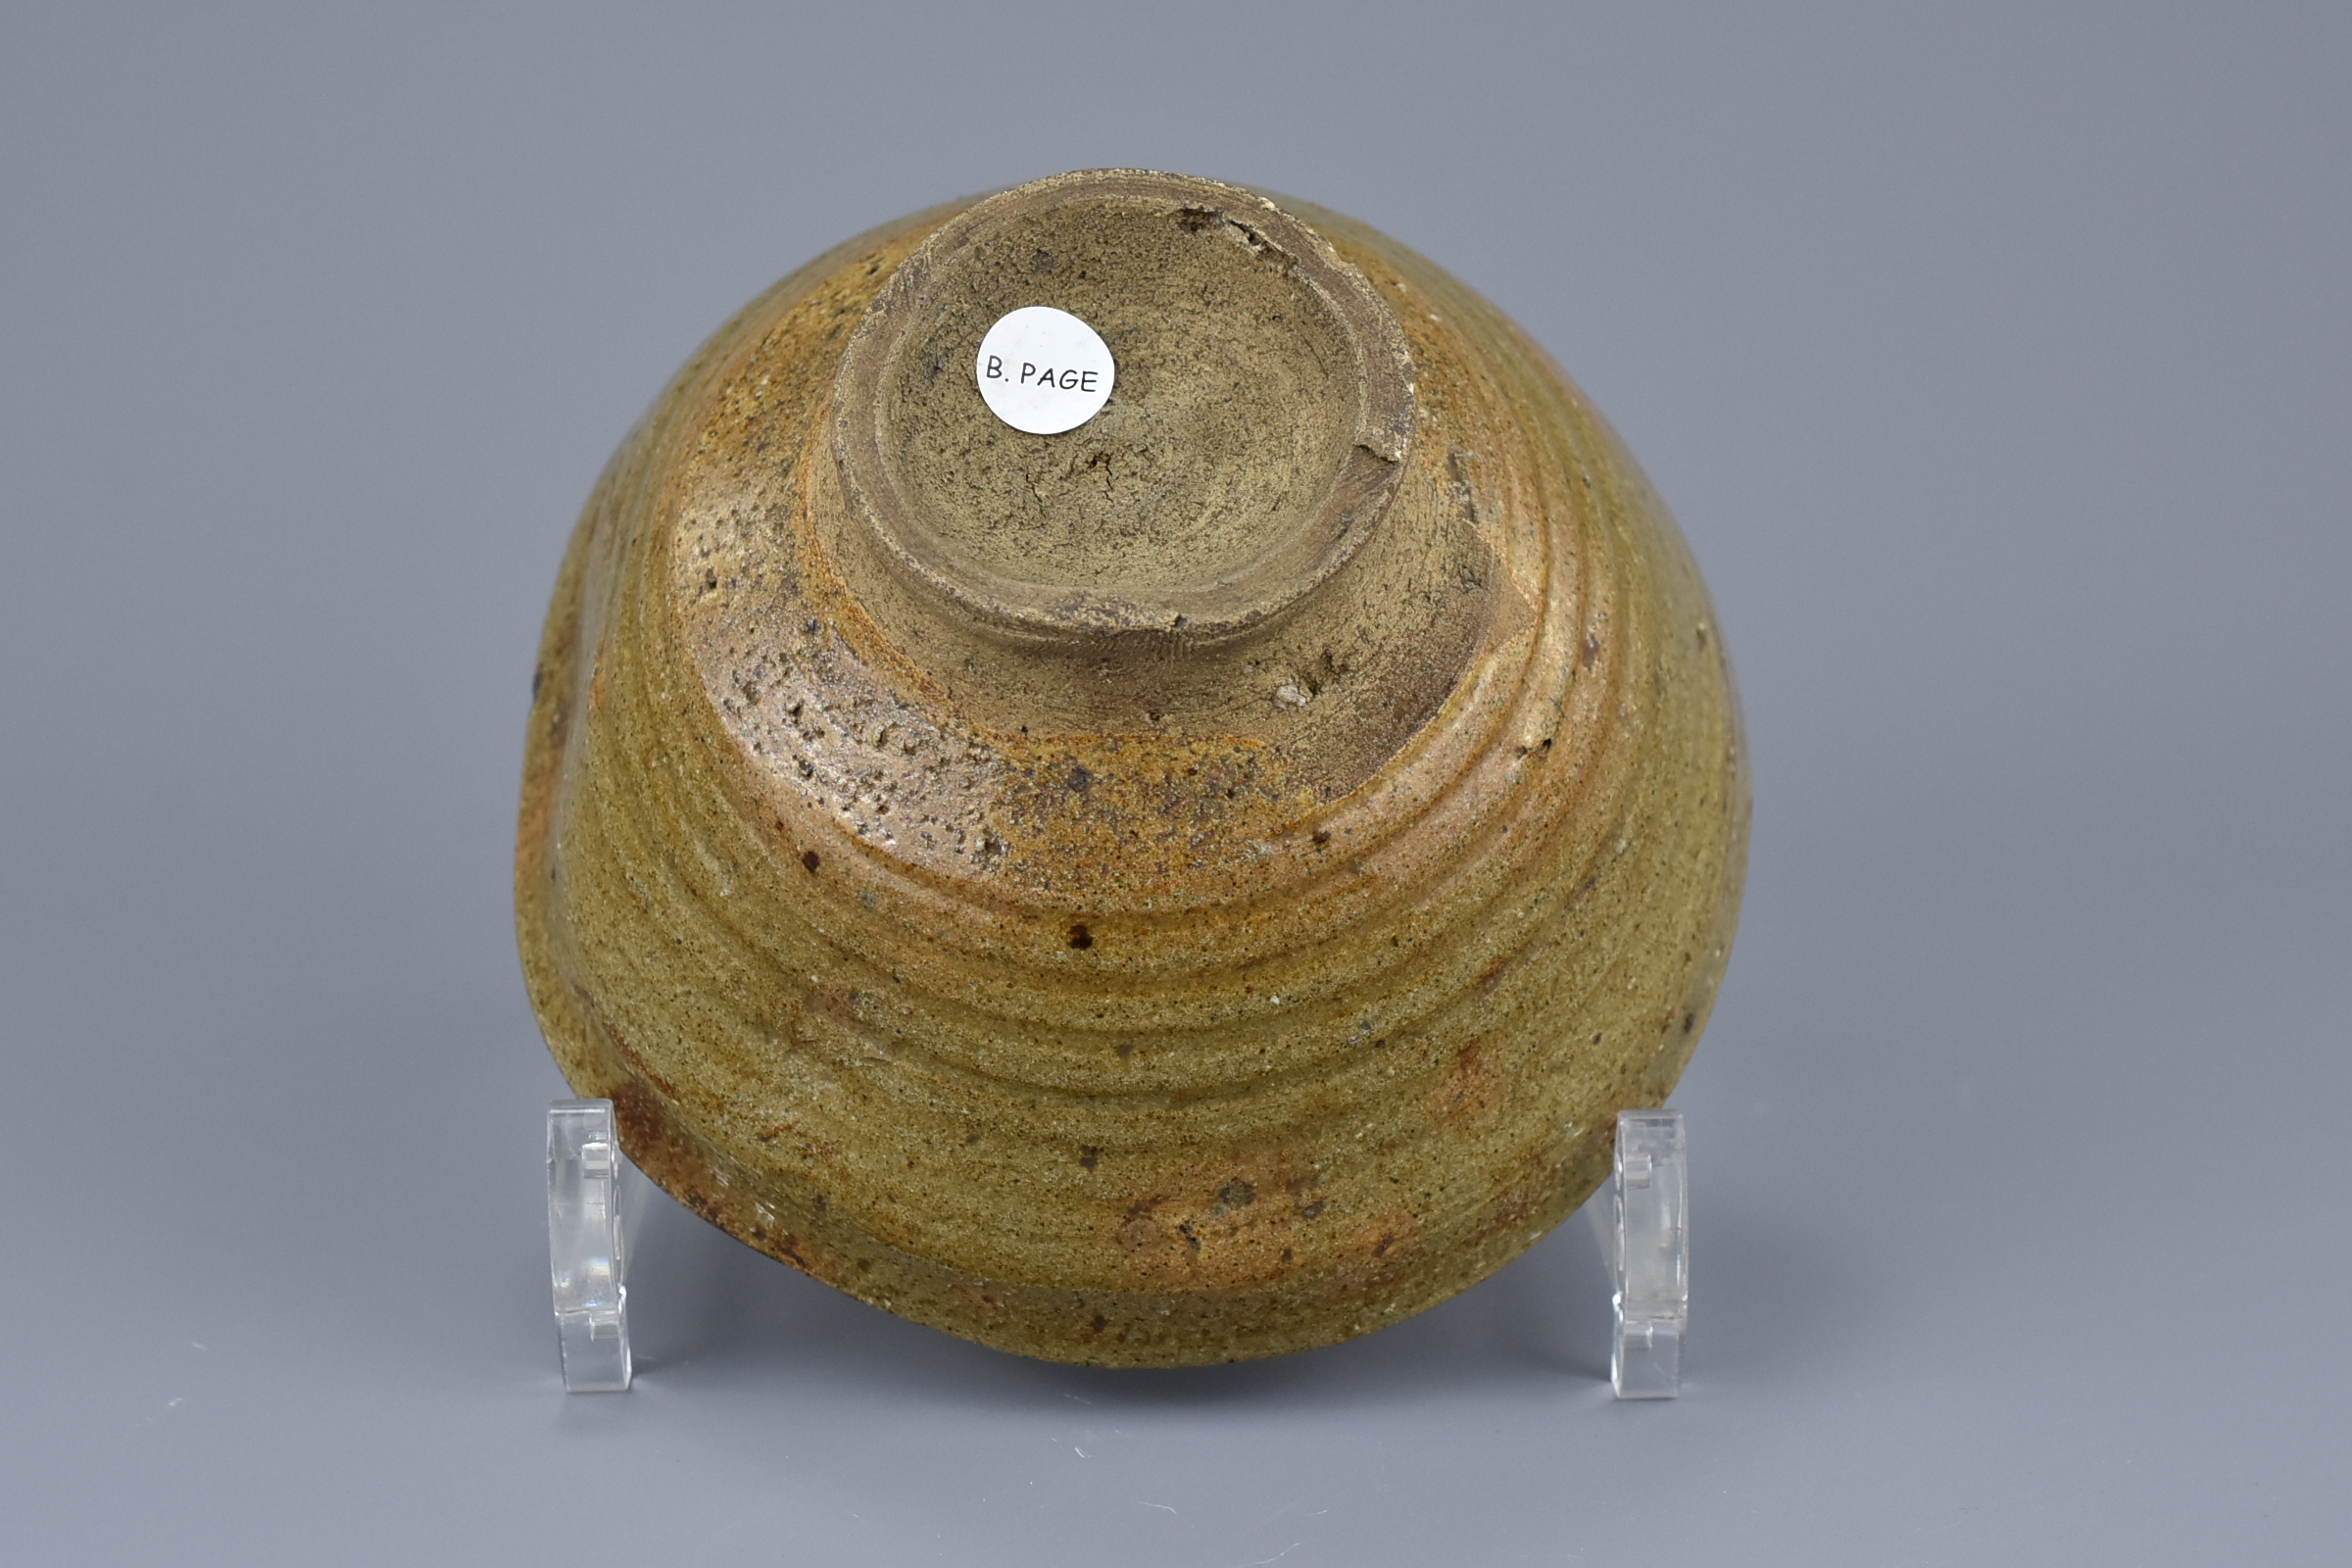 A Japanese or Korean Glazed Stoneware Bowl of Conical Form, 19th Century - Image 6 of 7